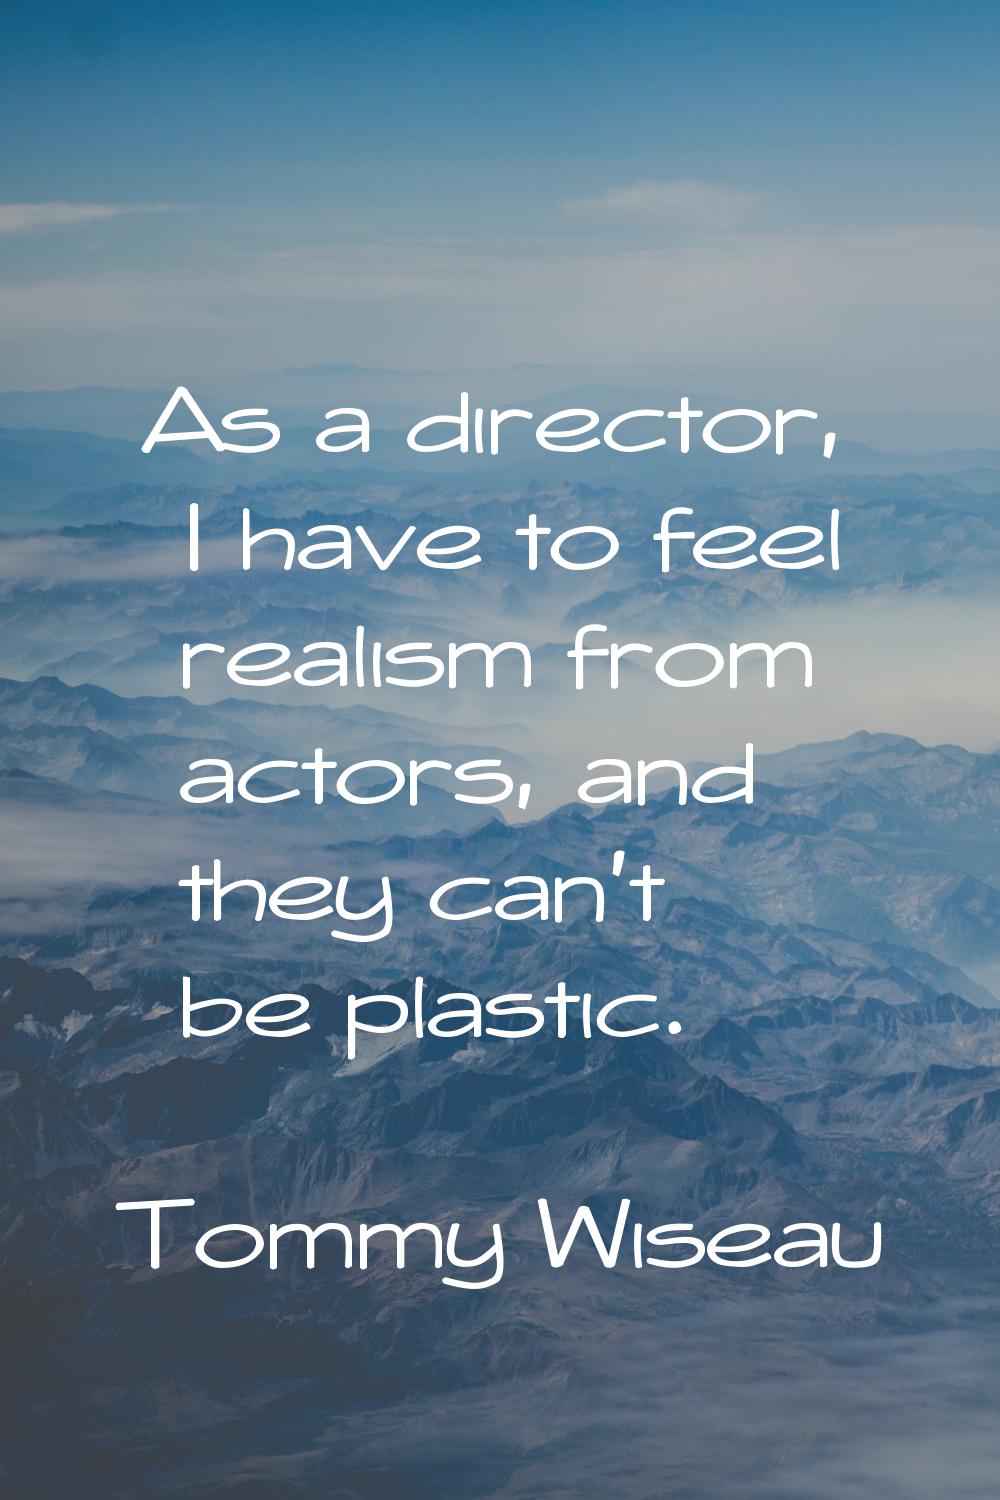 As a director, I have to feel realism from actors, and they can't be plastic.